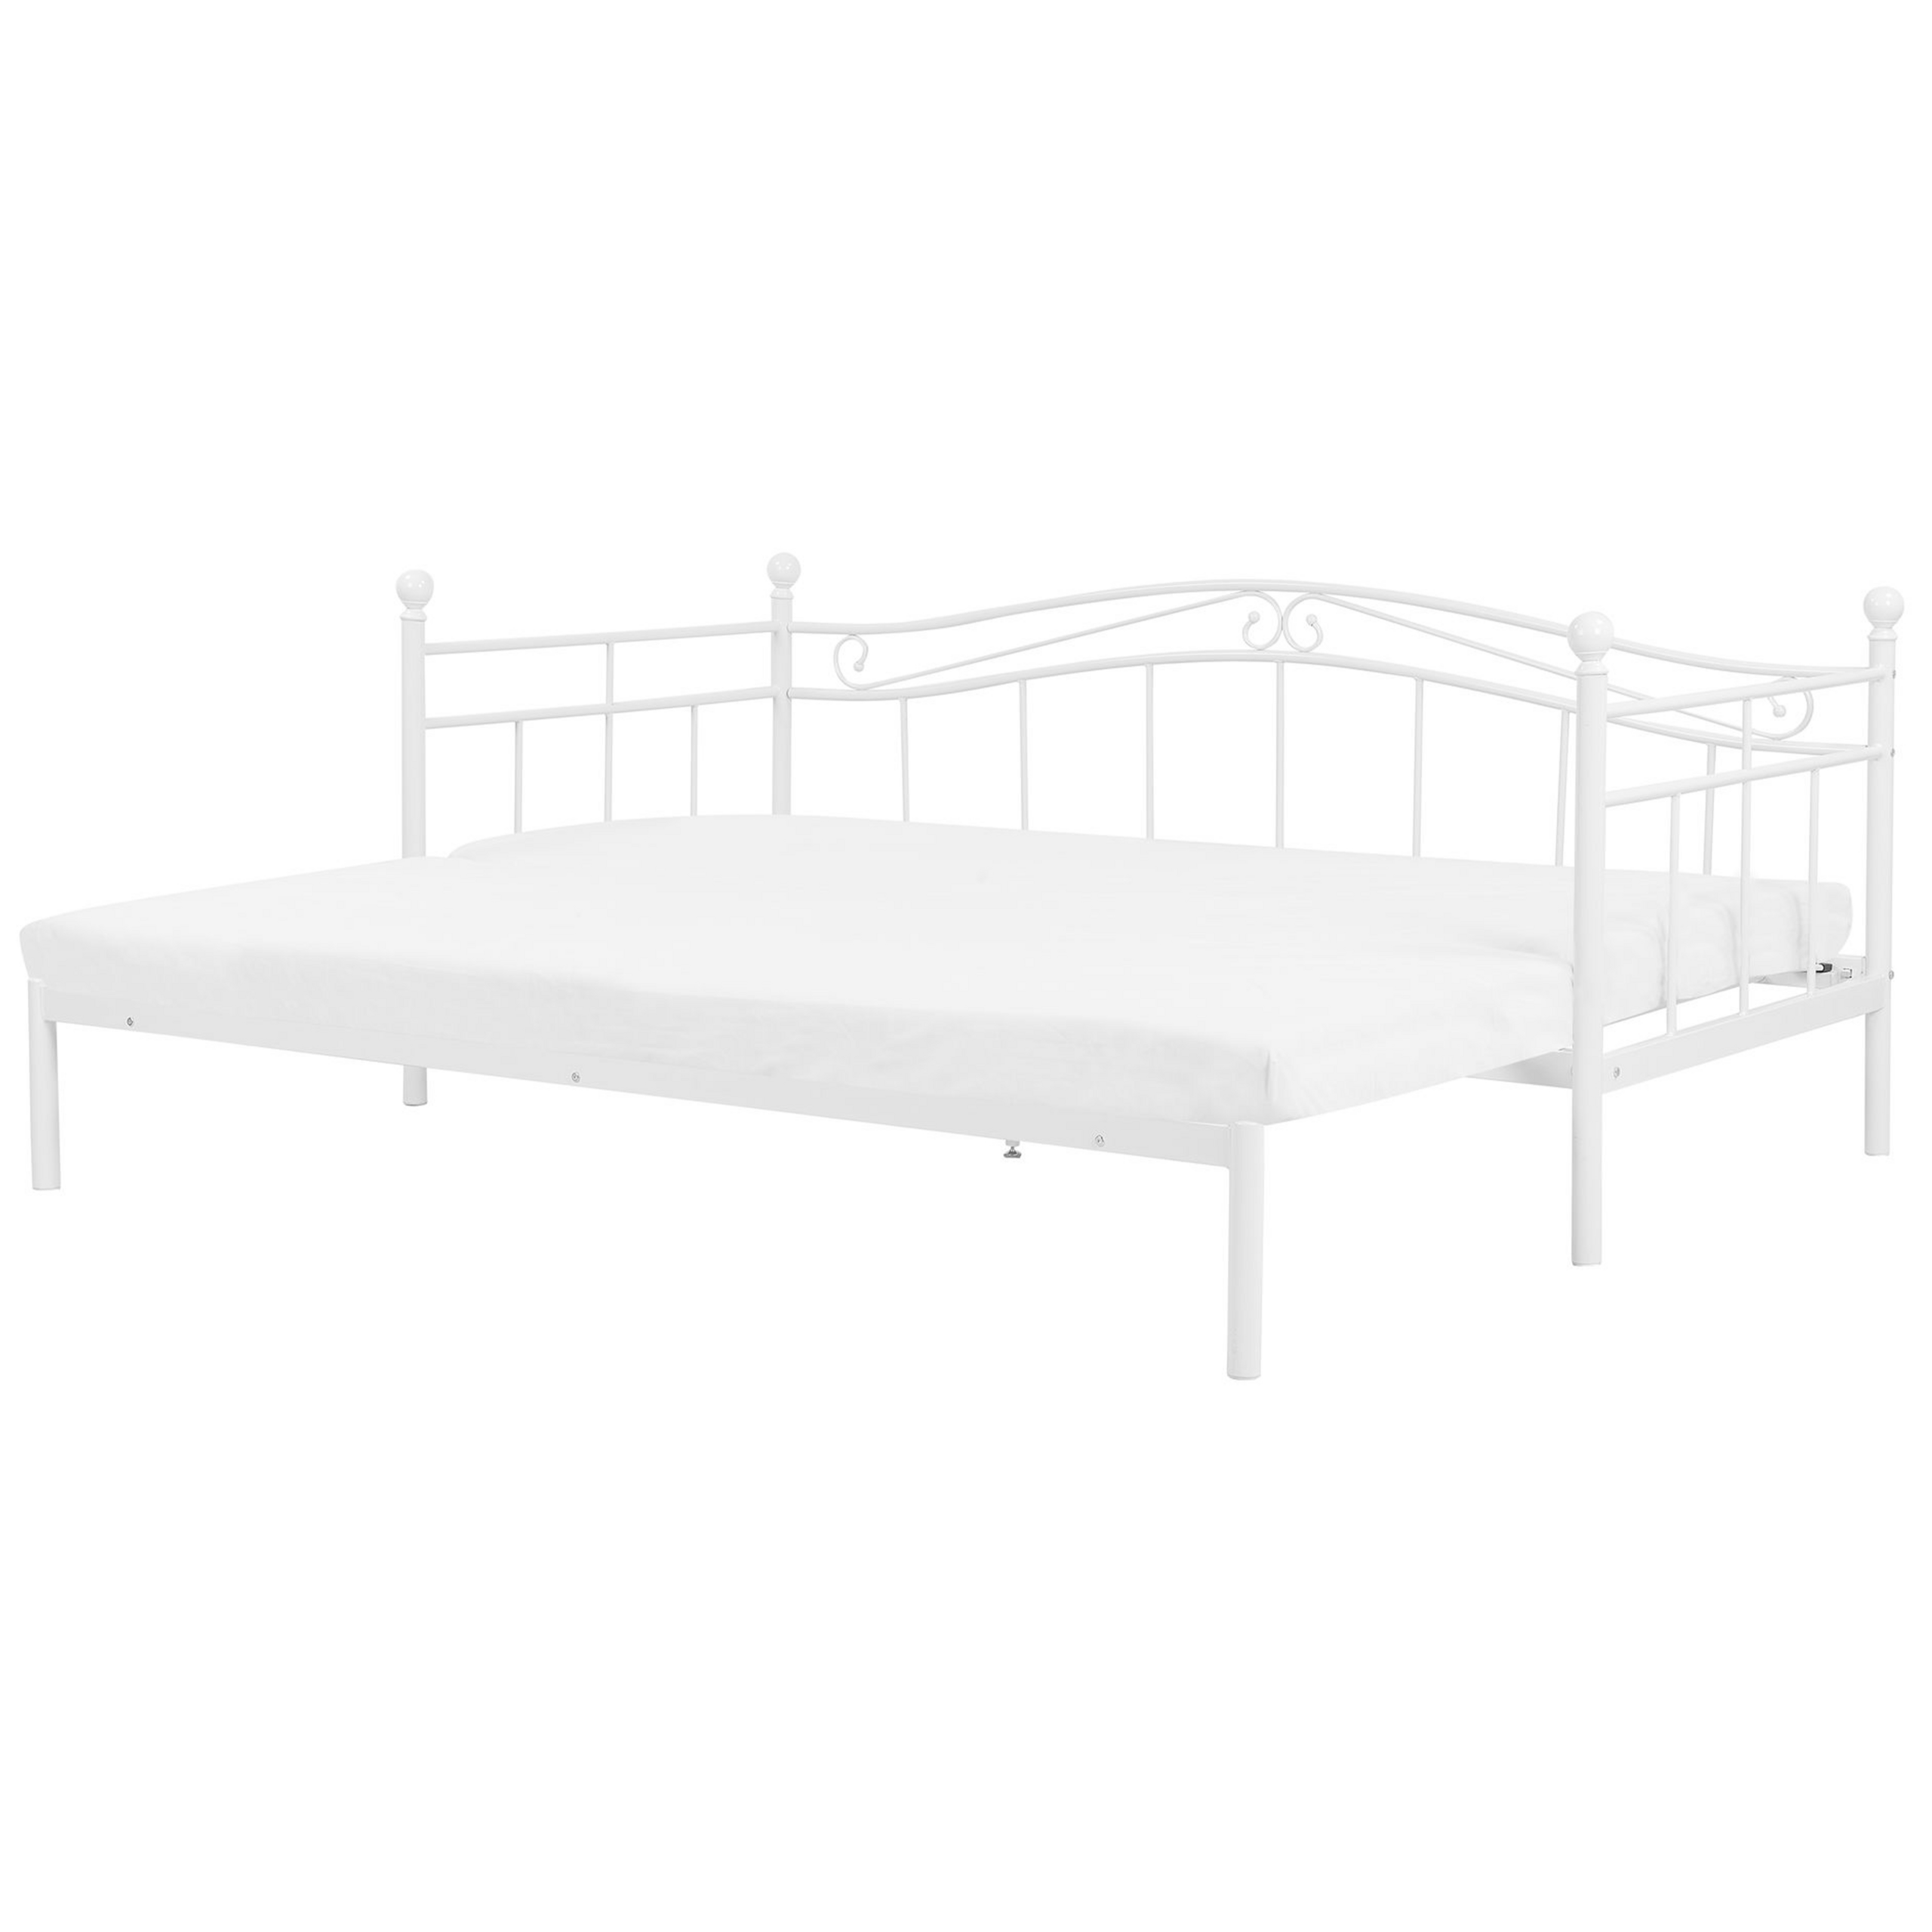 Beliani Daybed Trundle Bed White EU Single 3ft to EU Super King Size 6ft Slatted Base Pull-Out Convertible